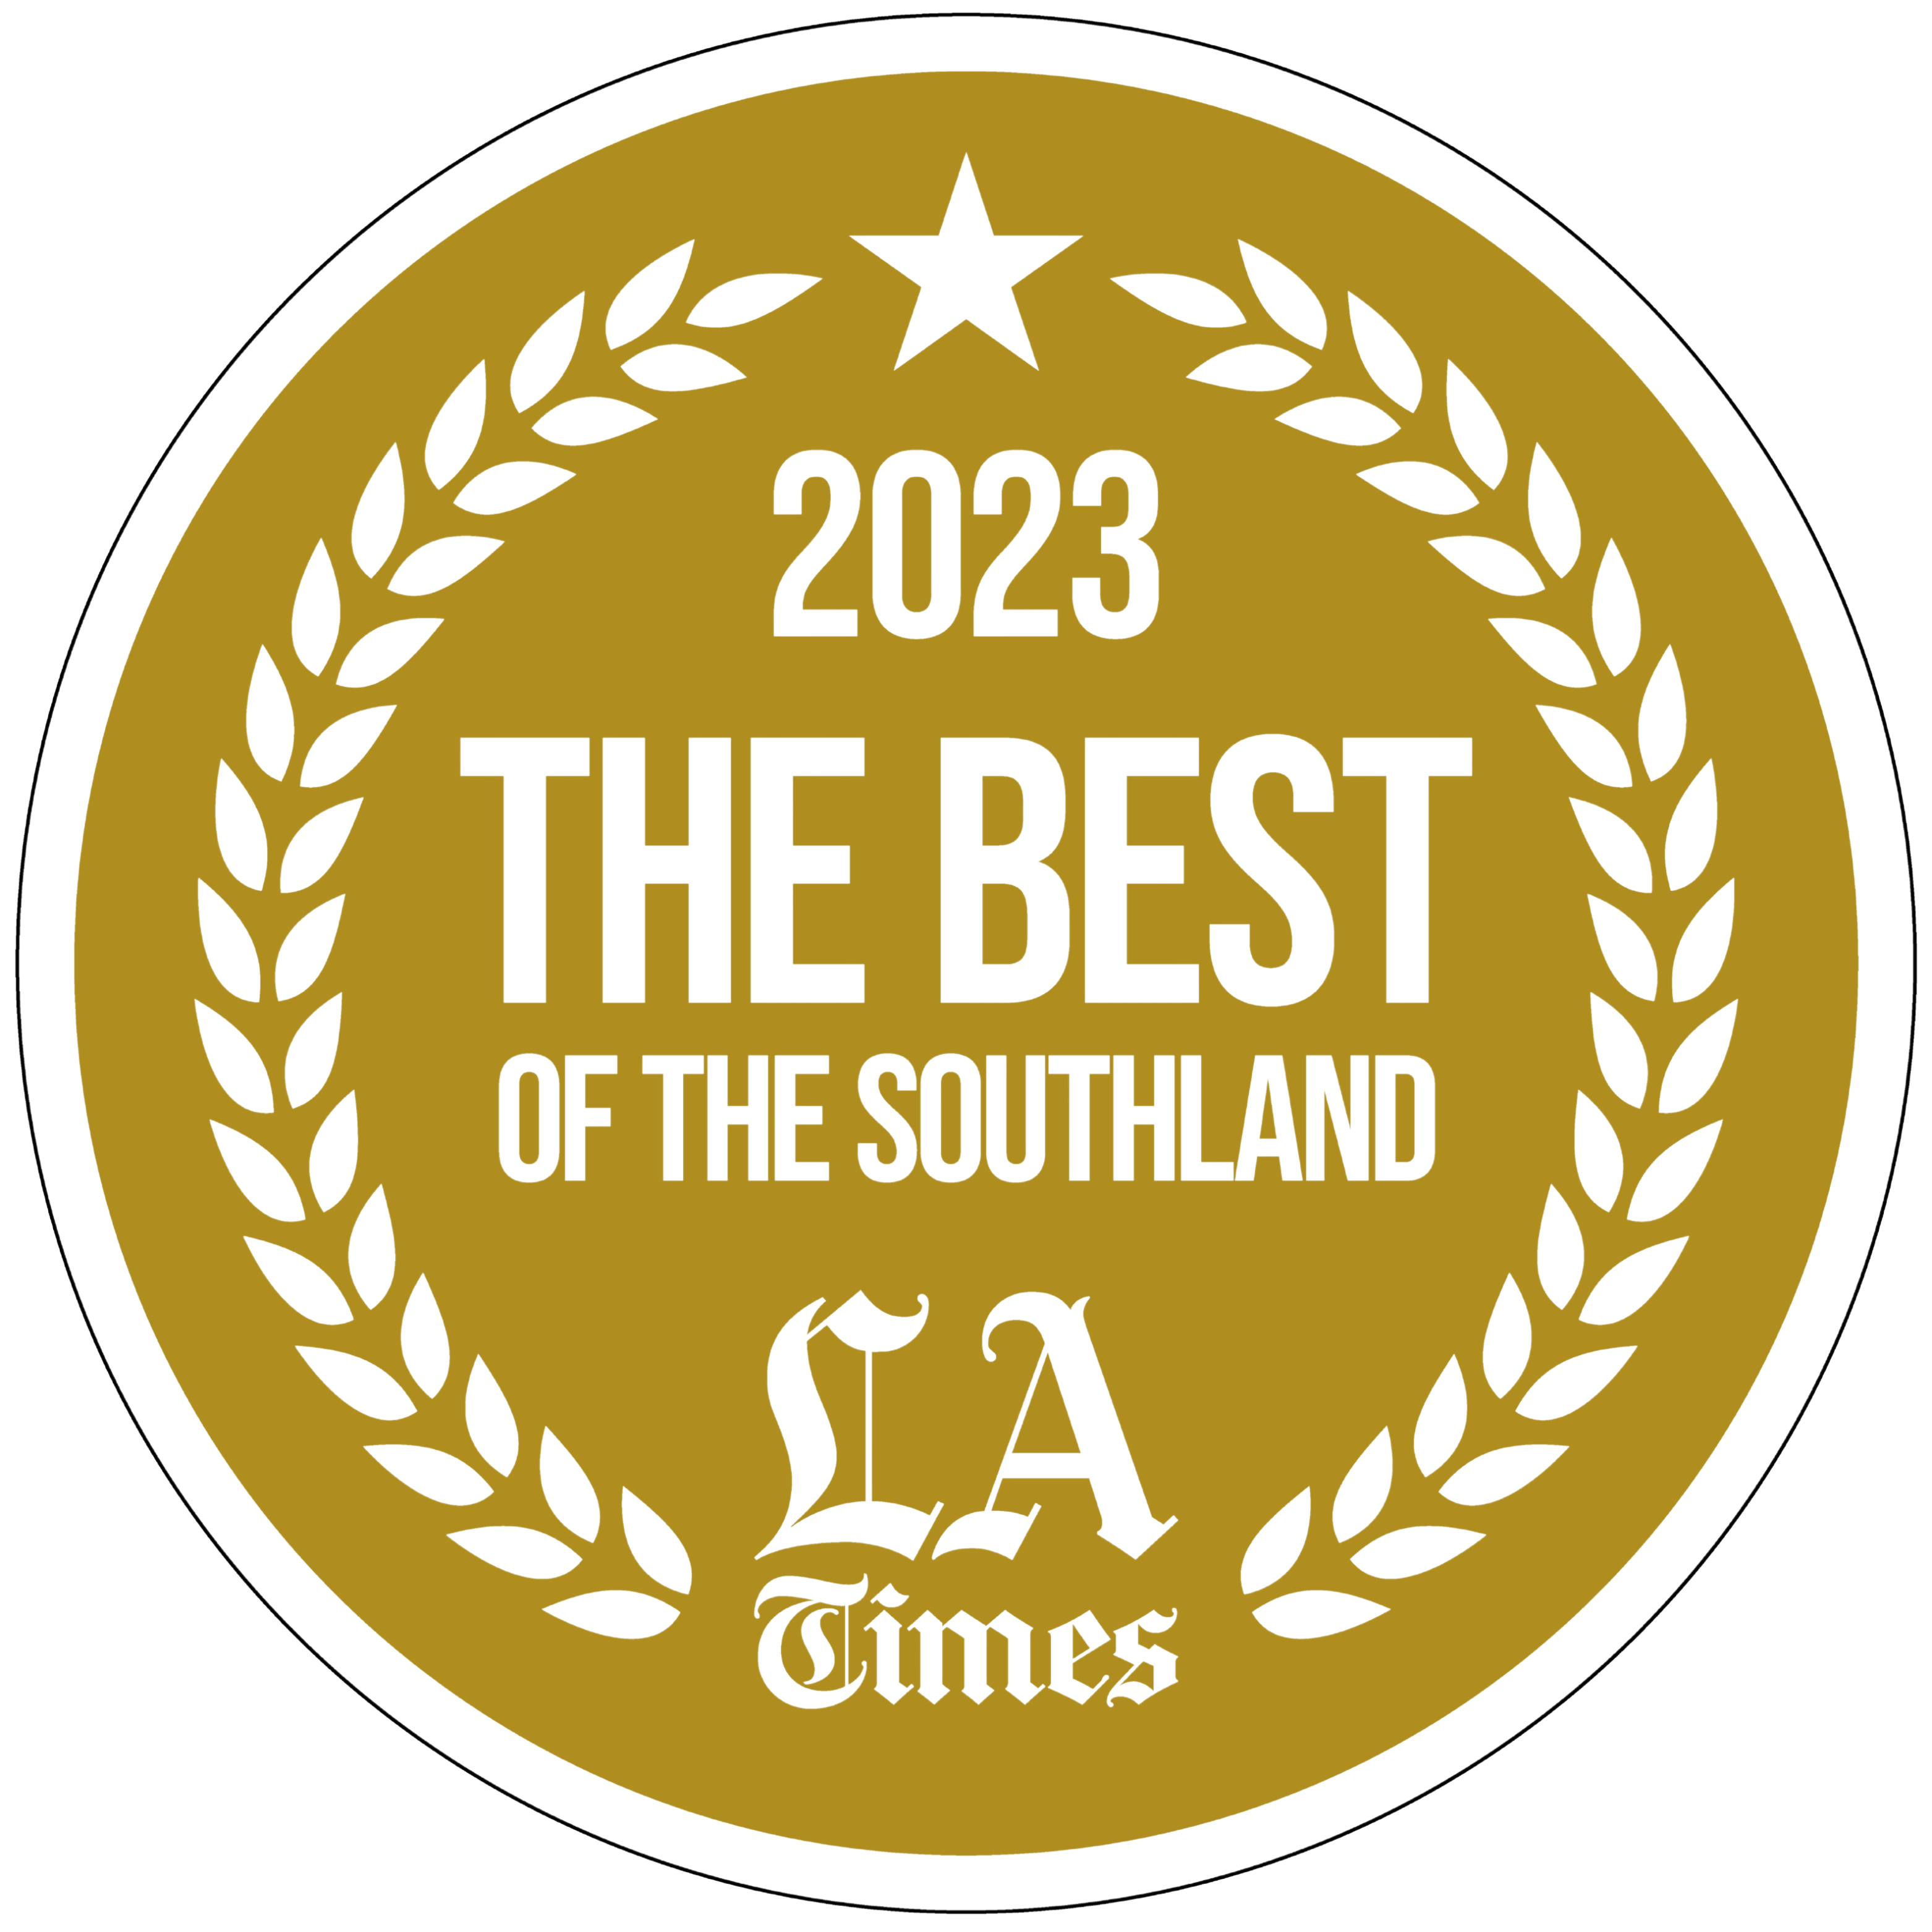 LA Times Best of the Southland 2023 - Southern California's Best Window and Door Company